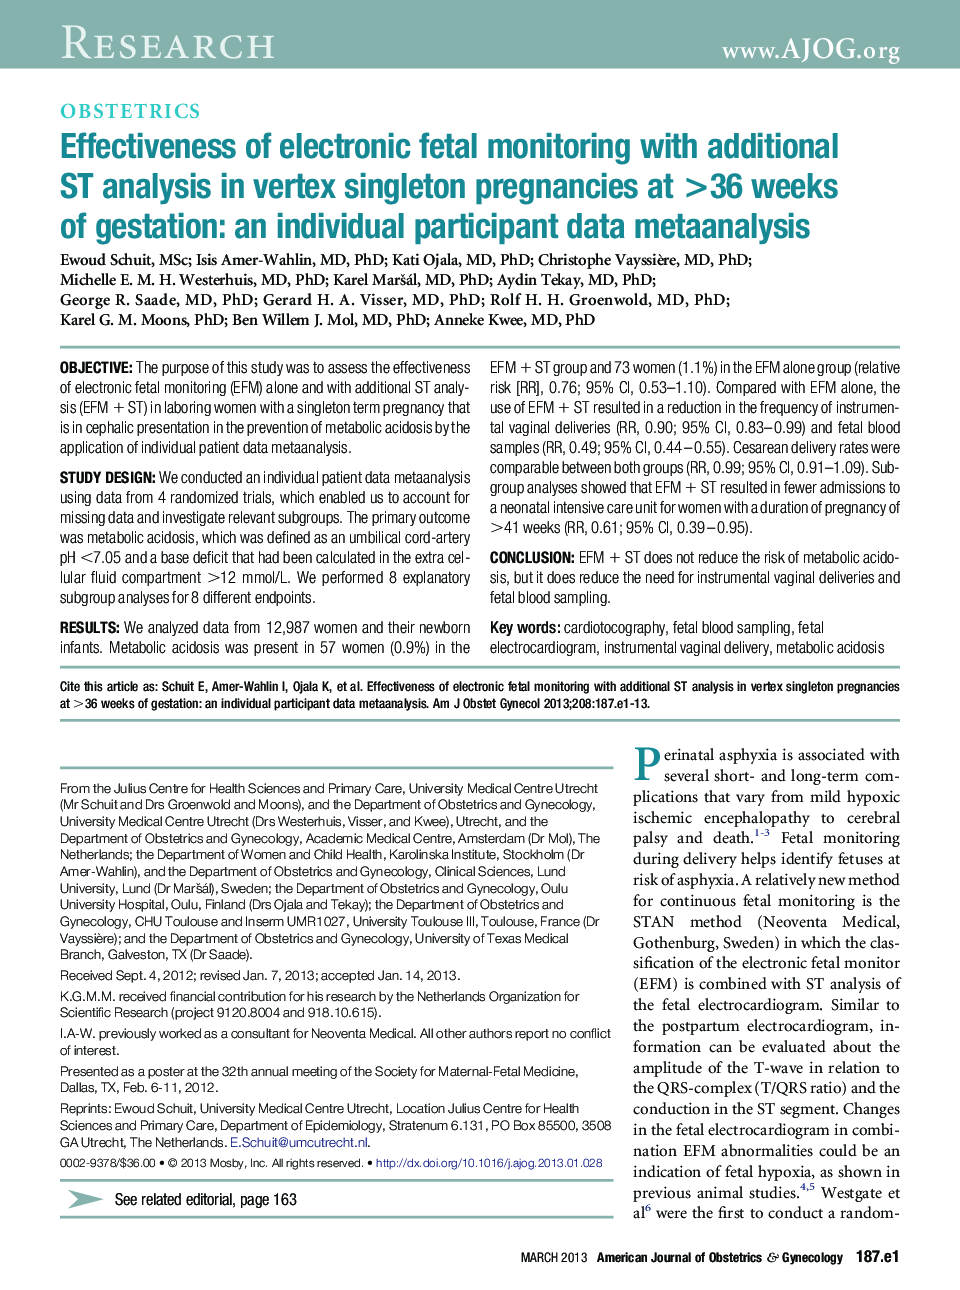 Effectiveness of electronic fetal monitoring with additional ST analysis in vertex singleton pregnancies at >36 weeks of gestation: an individual participant data metaanalysis